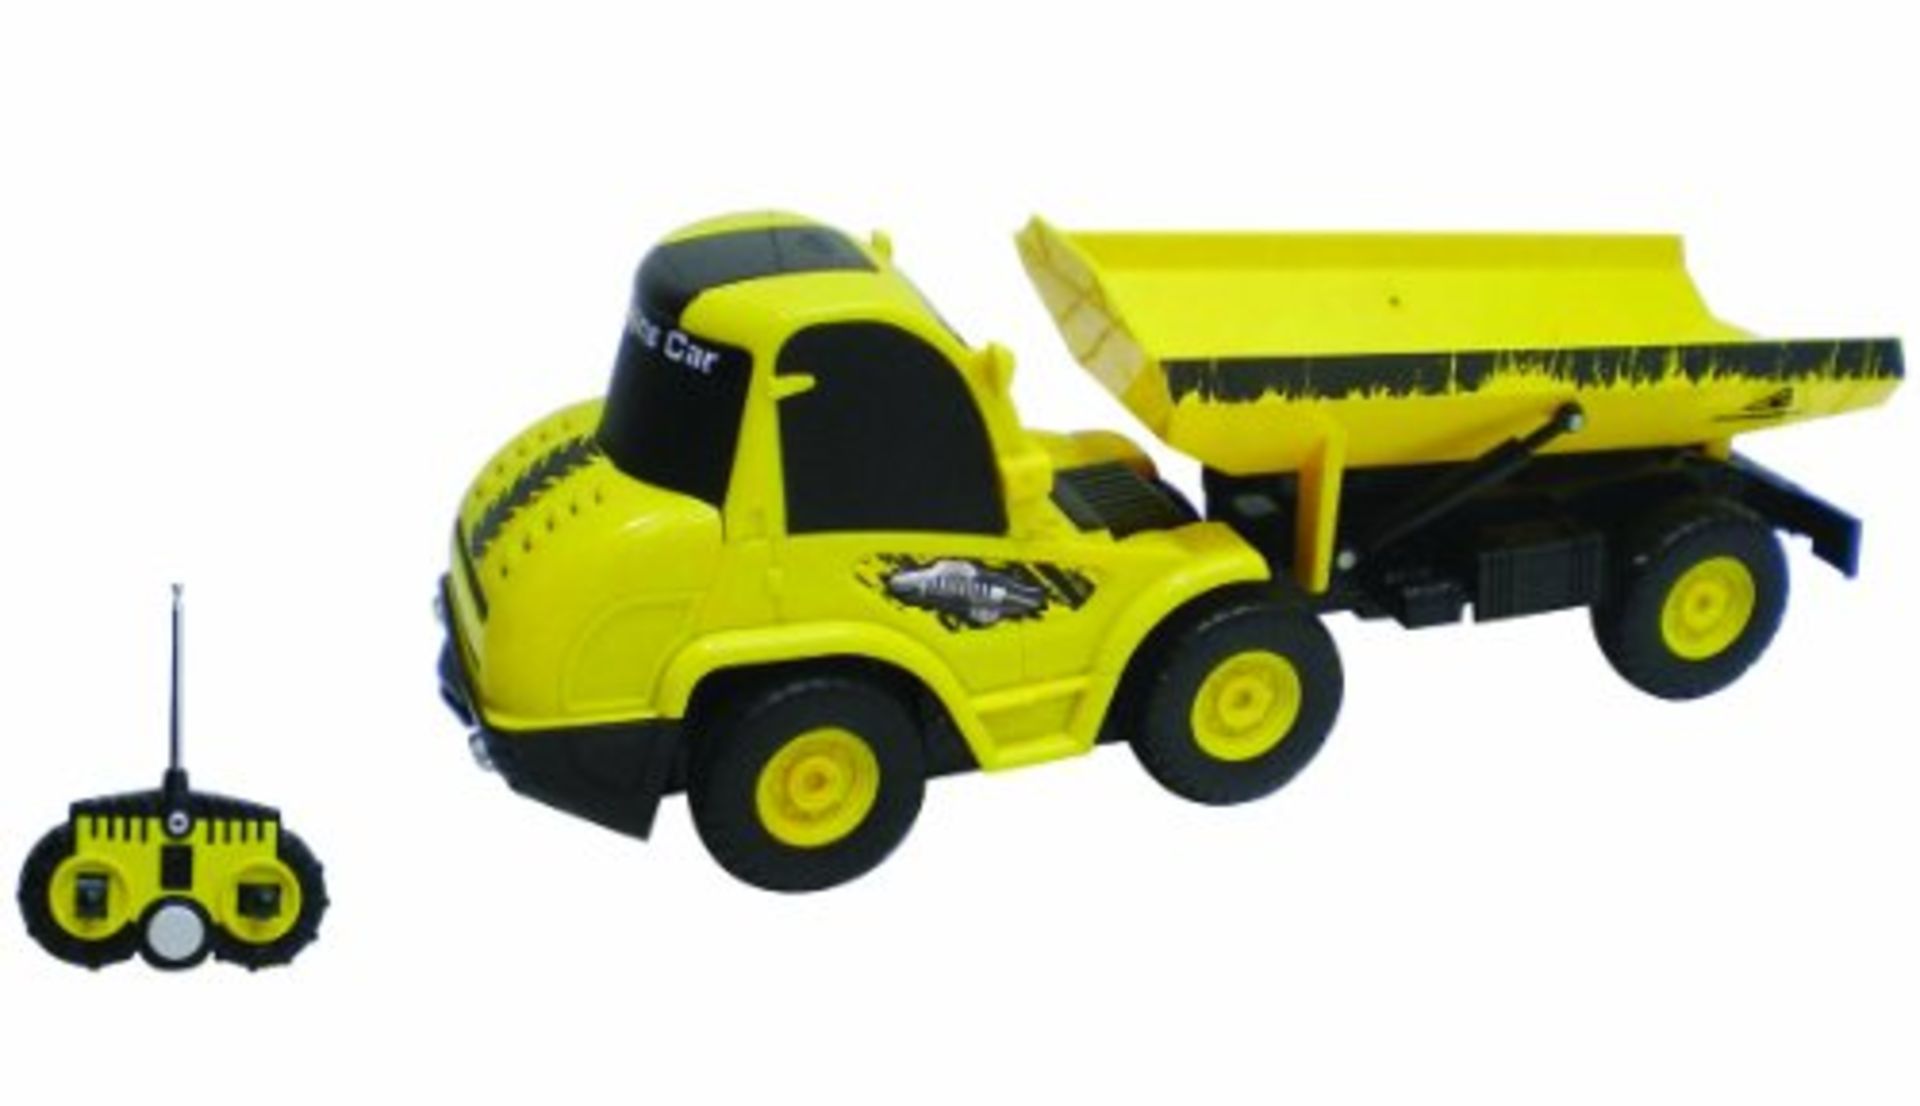 V *TRADE QTY* Brand New 1:20 Remote Control Construction Tipper Vehicle X 10 YOUR BID PRICE TO BE